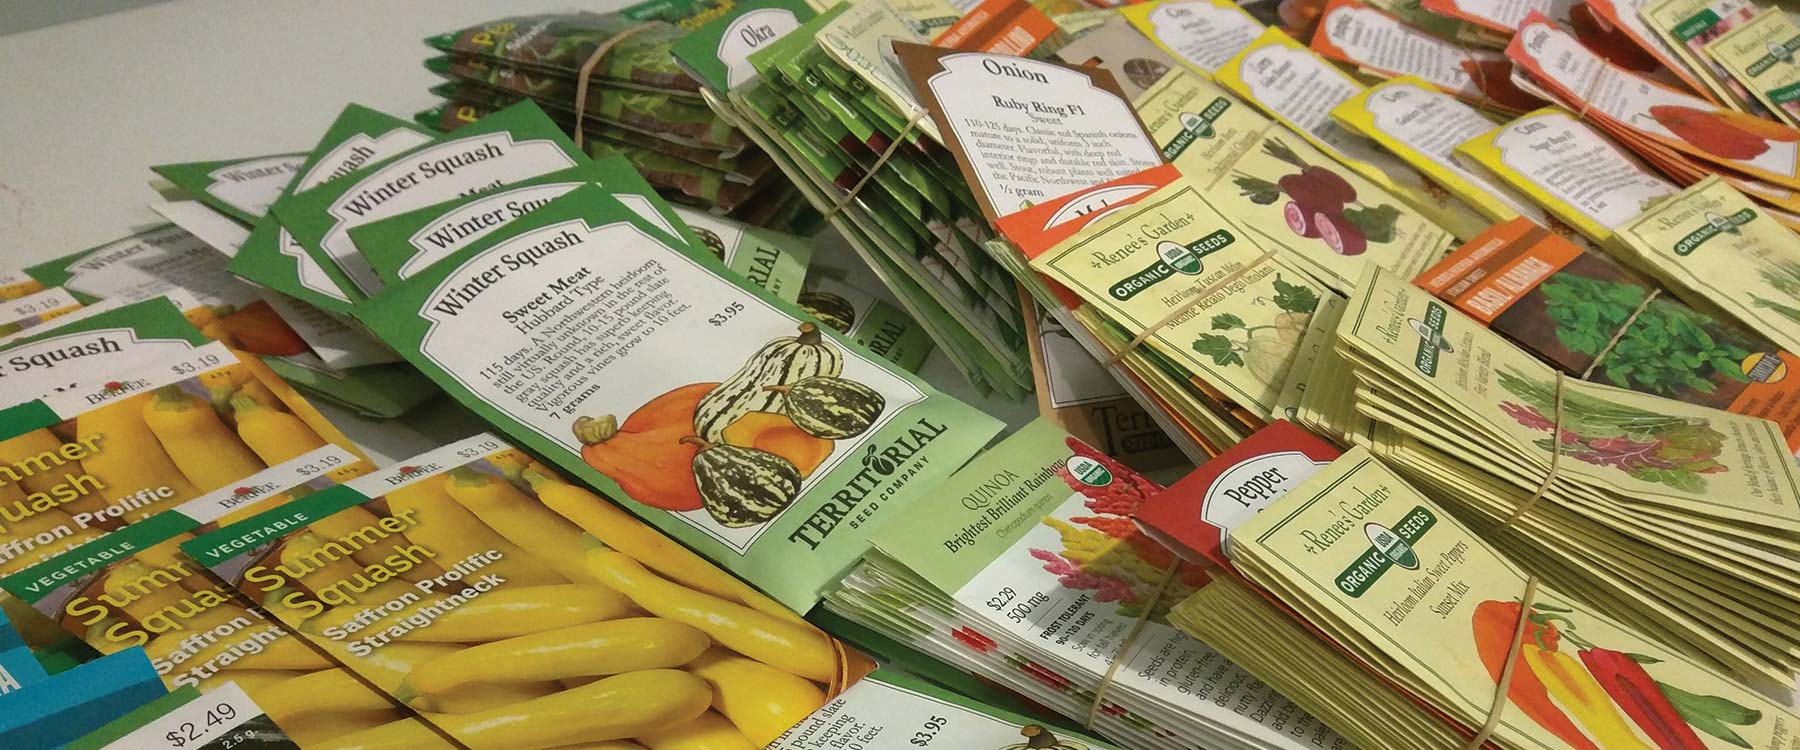 A close-up of vegetable seed packets bundled by type.